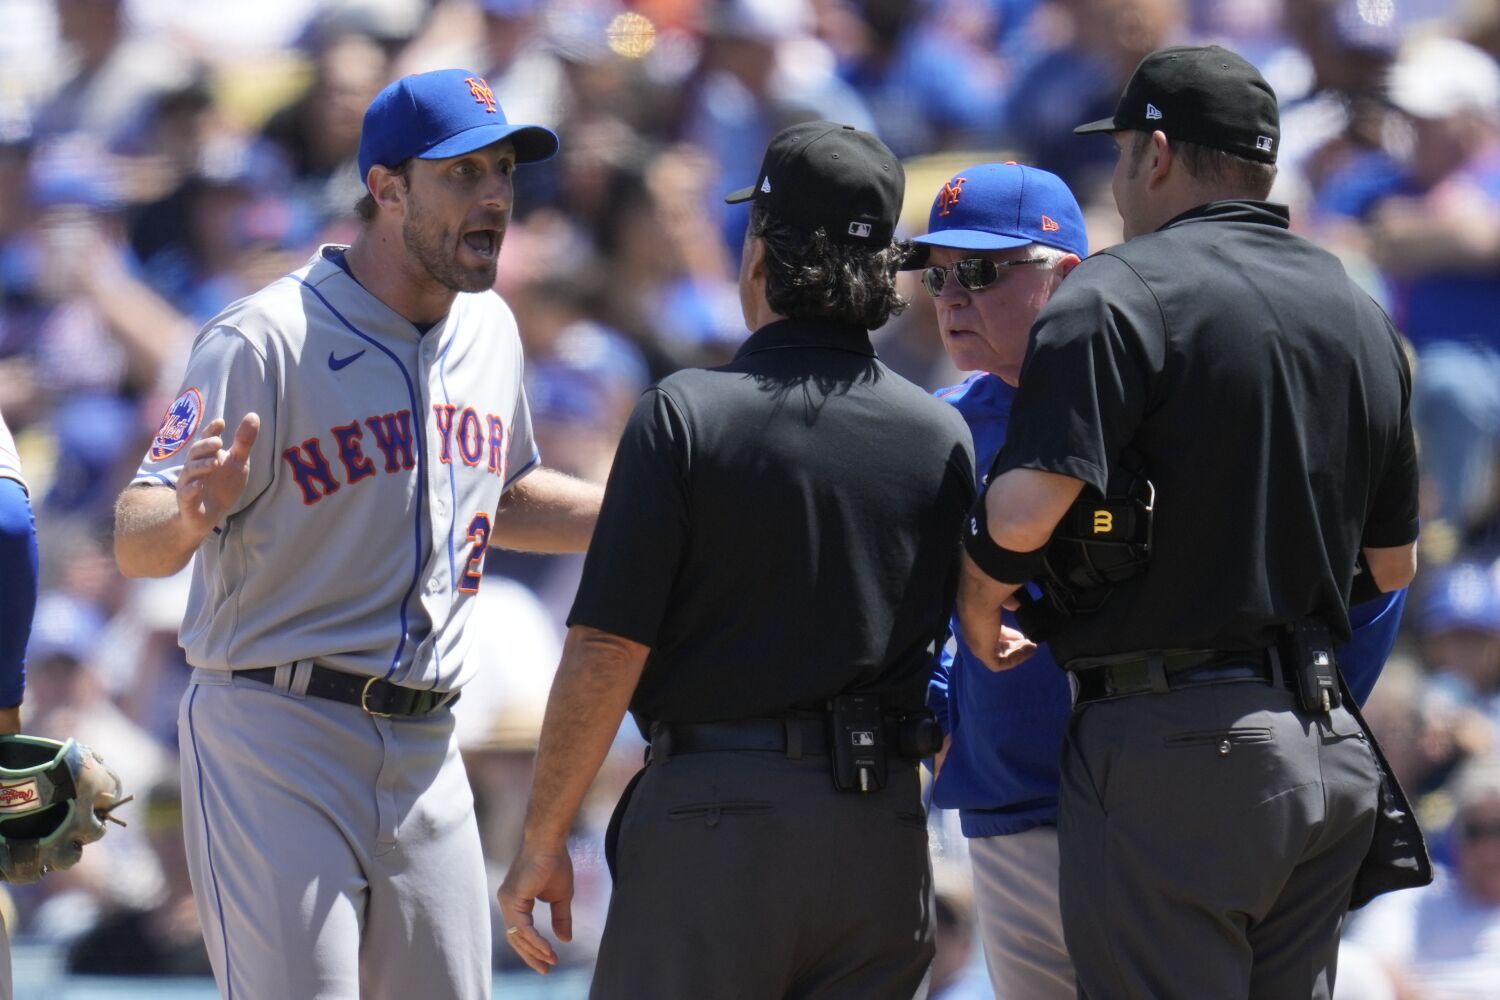 Mets' Max Scherzer suspended 10 games for violating MLB rules on use of foreign substances